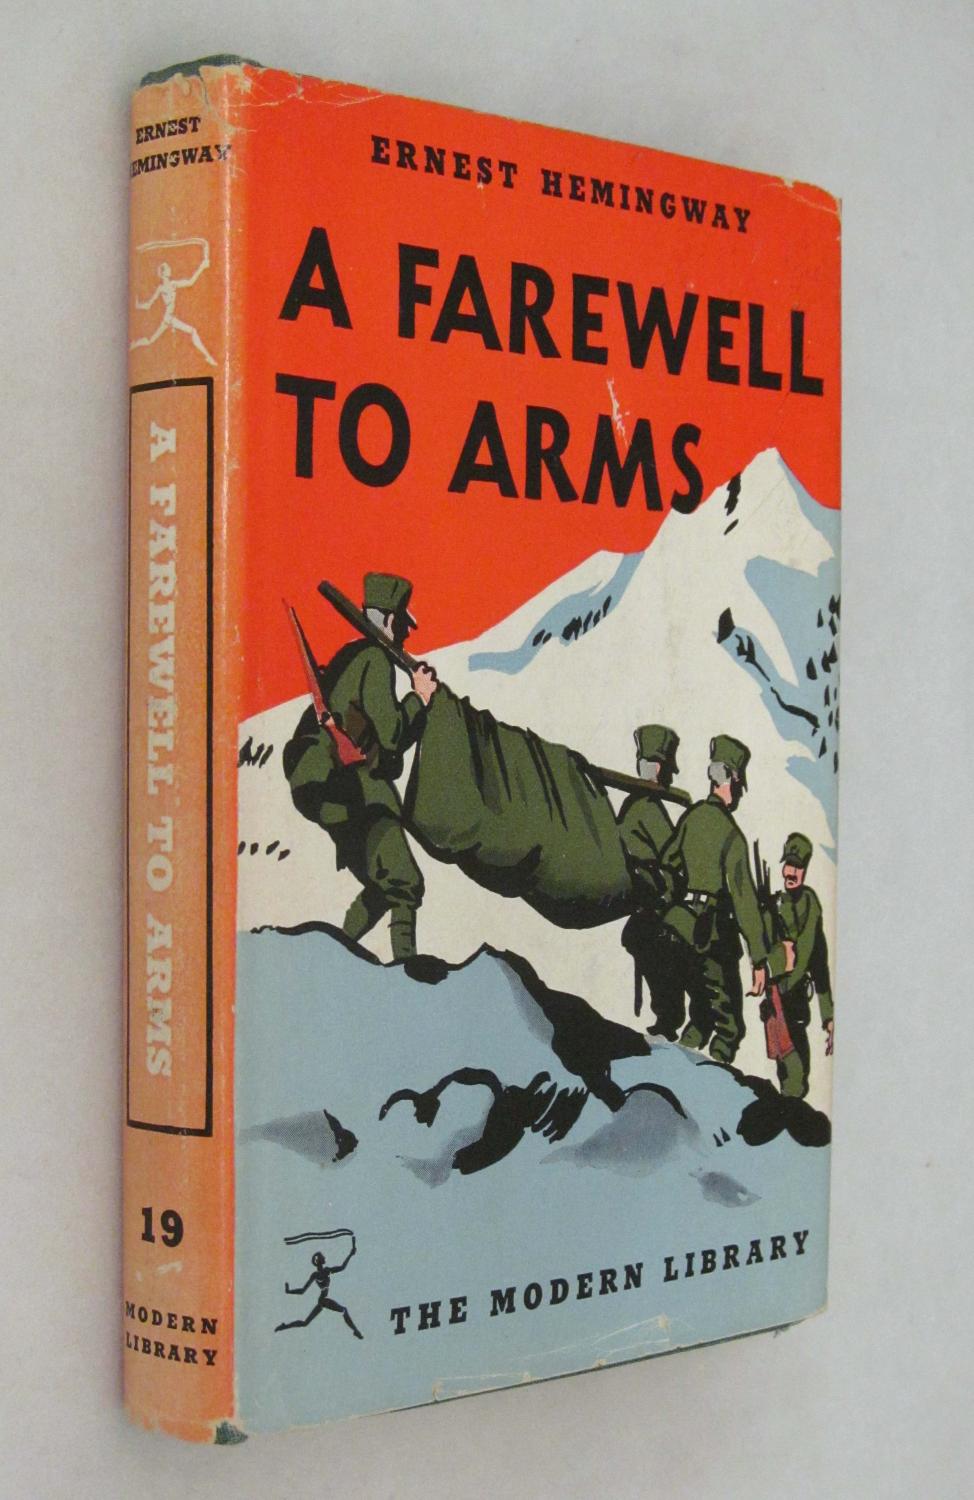 Who Is Ernest Hemingways Inspiration For A Farewell To Arms